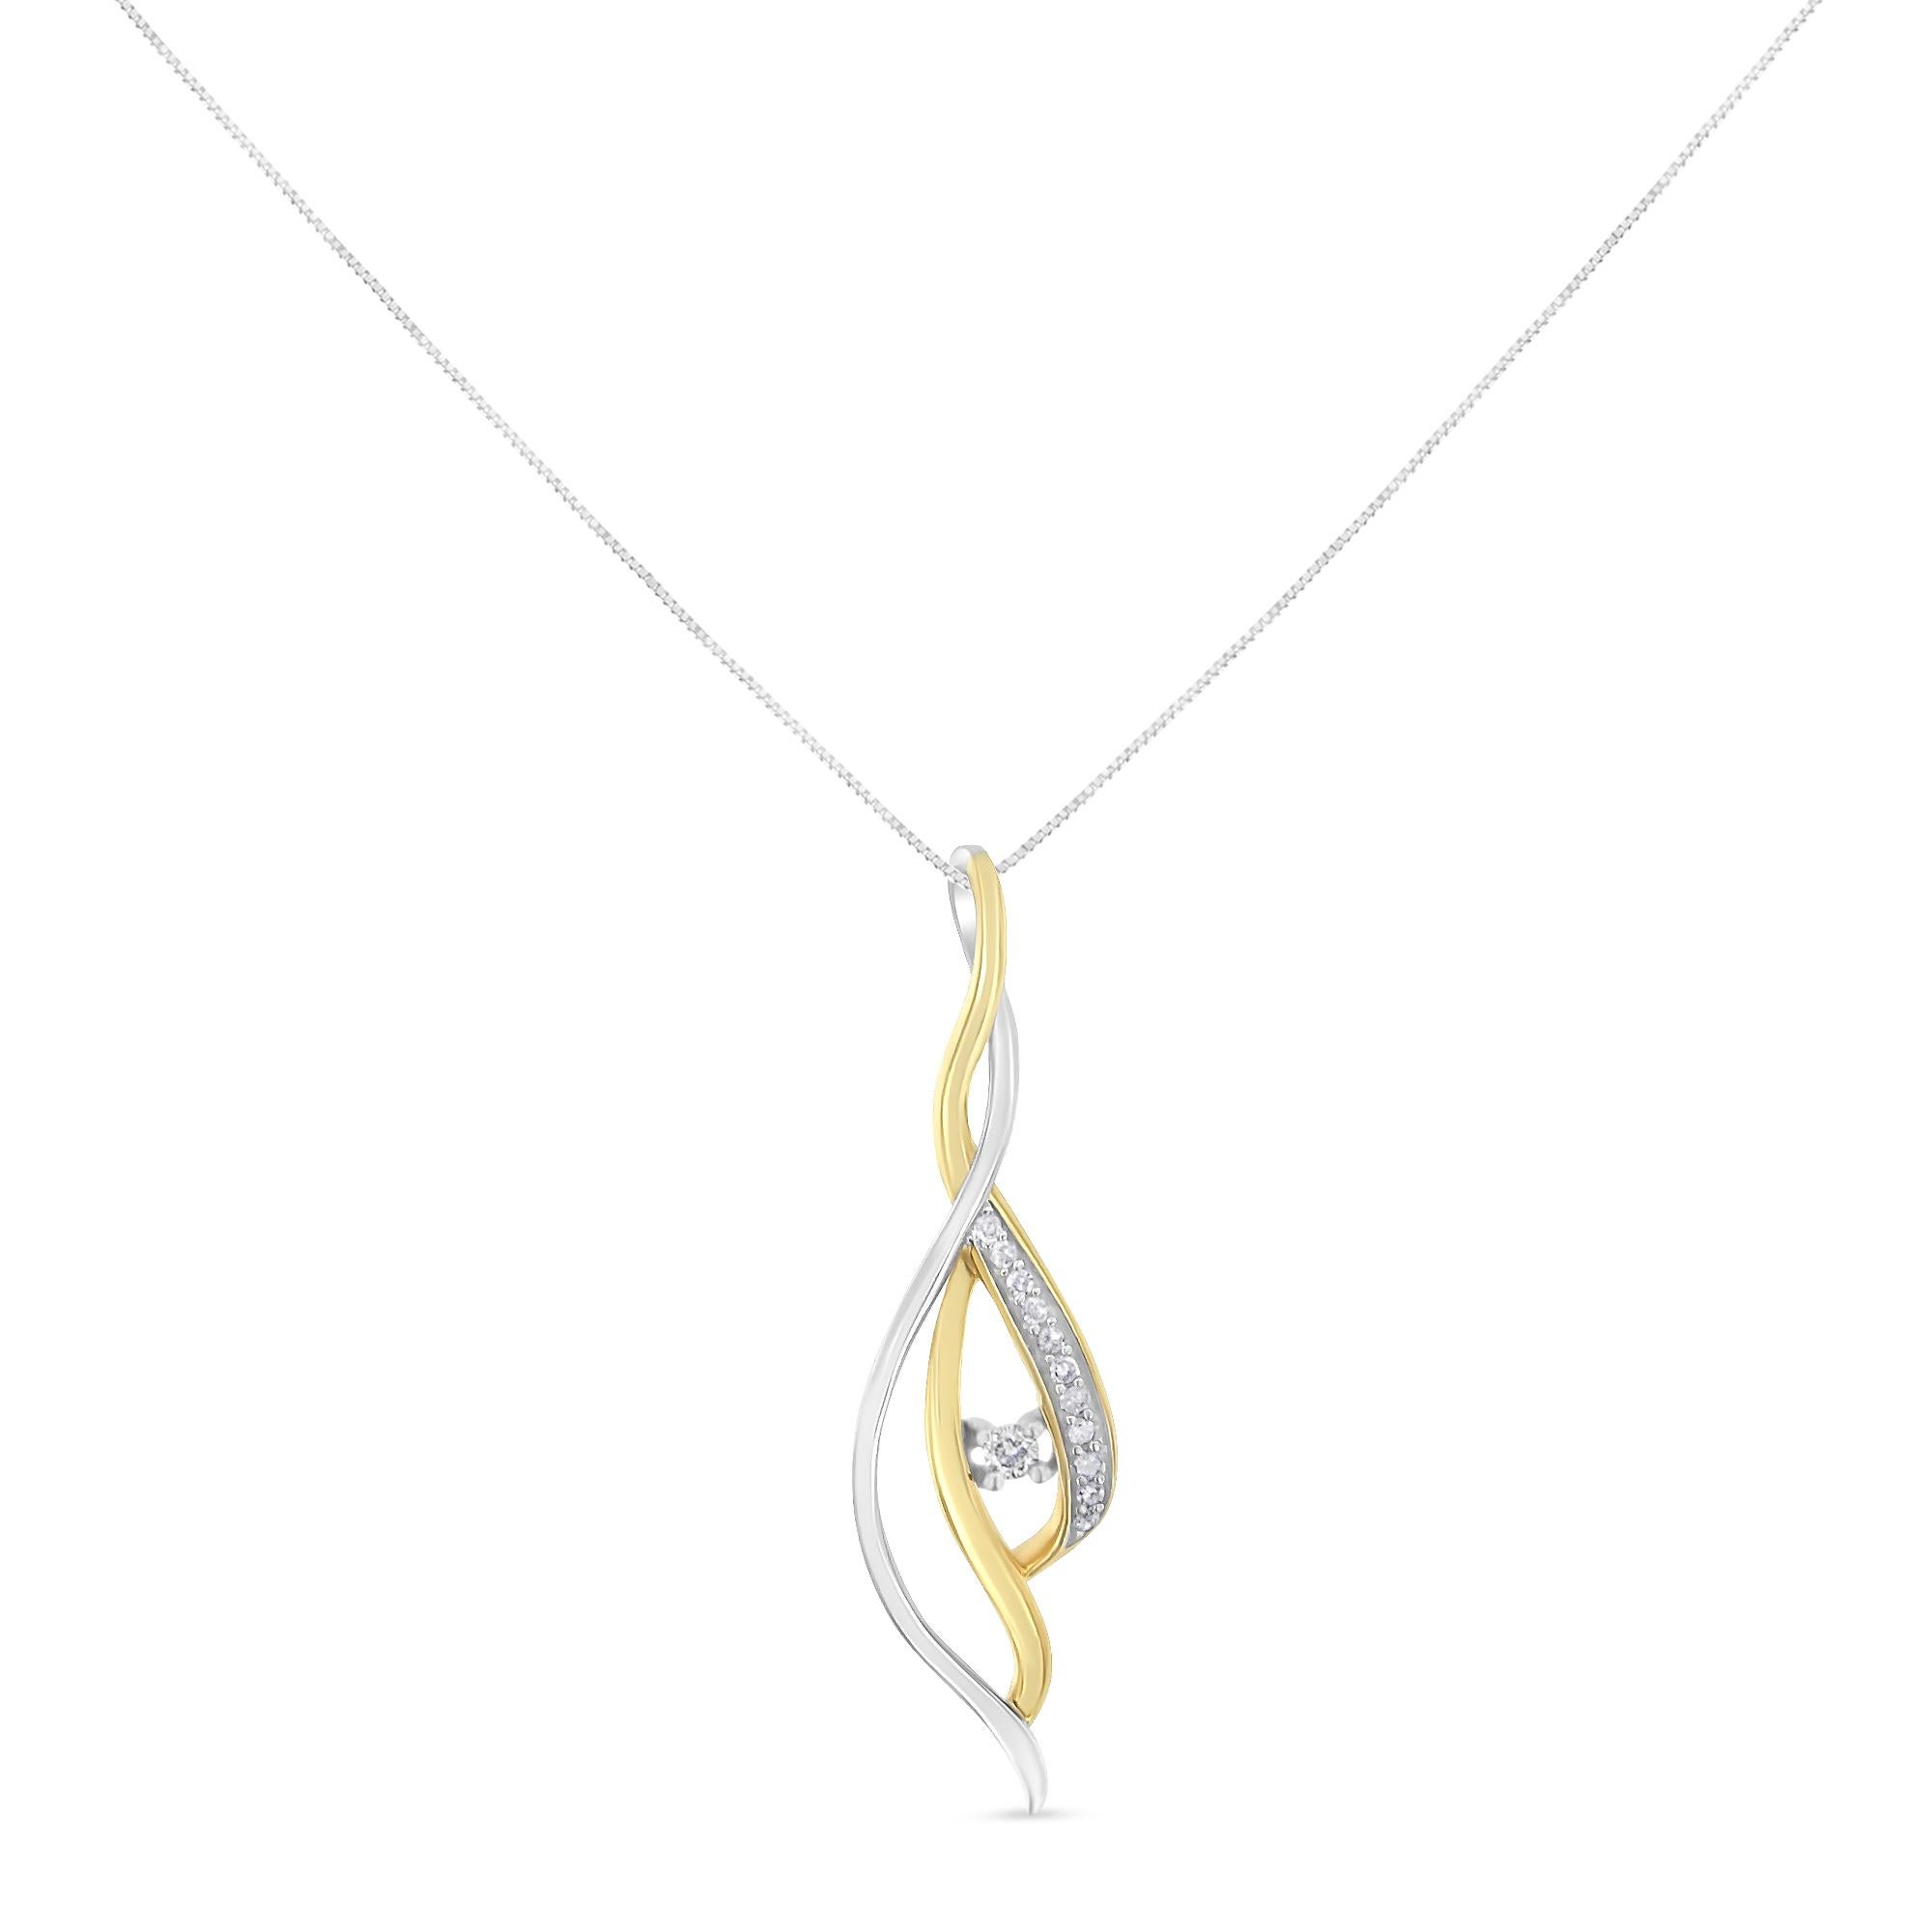 Spirals of 10K white and yellow gold cascade down to create a stunning spiral effect. With brilliant round diamonds adding lots of sparkle, this is one style she needs to have in her jewelry collection. This double layered swirl pendant dangles from